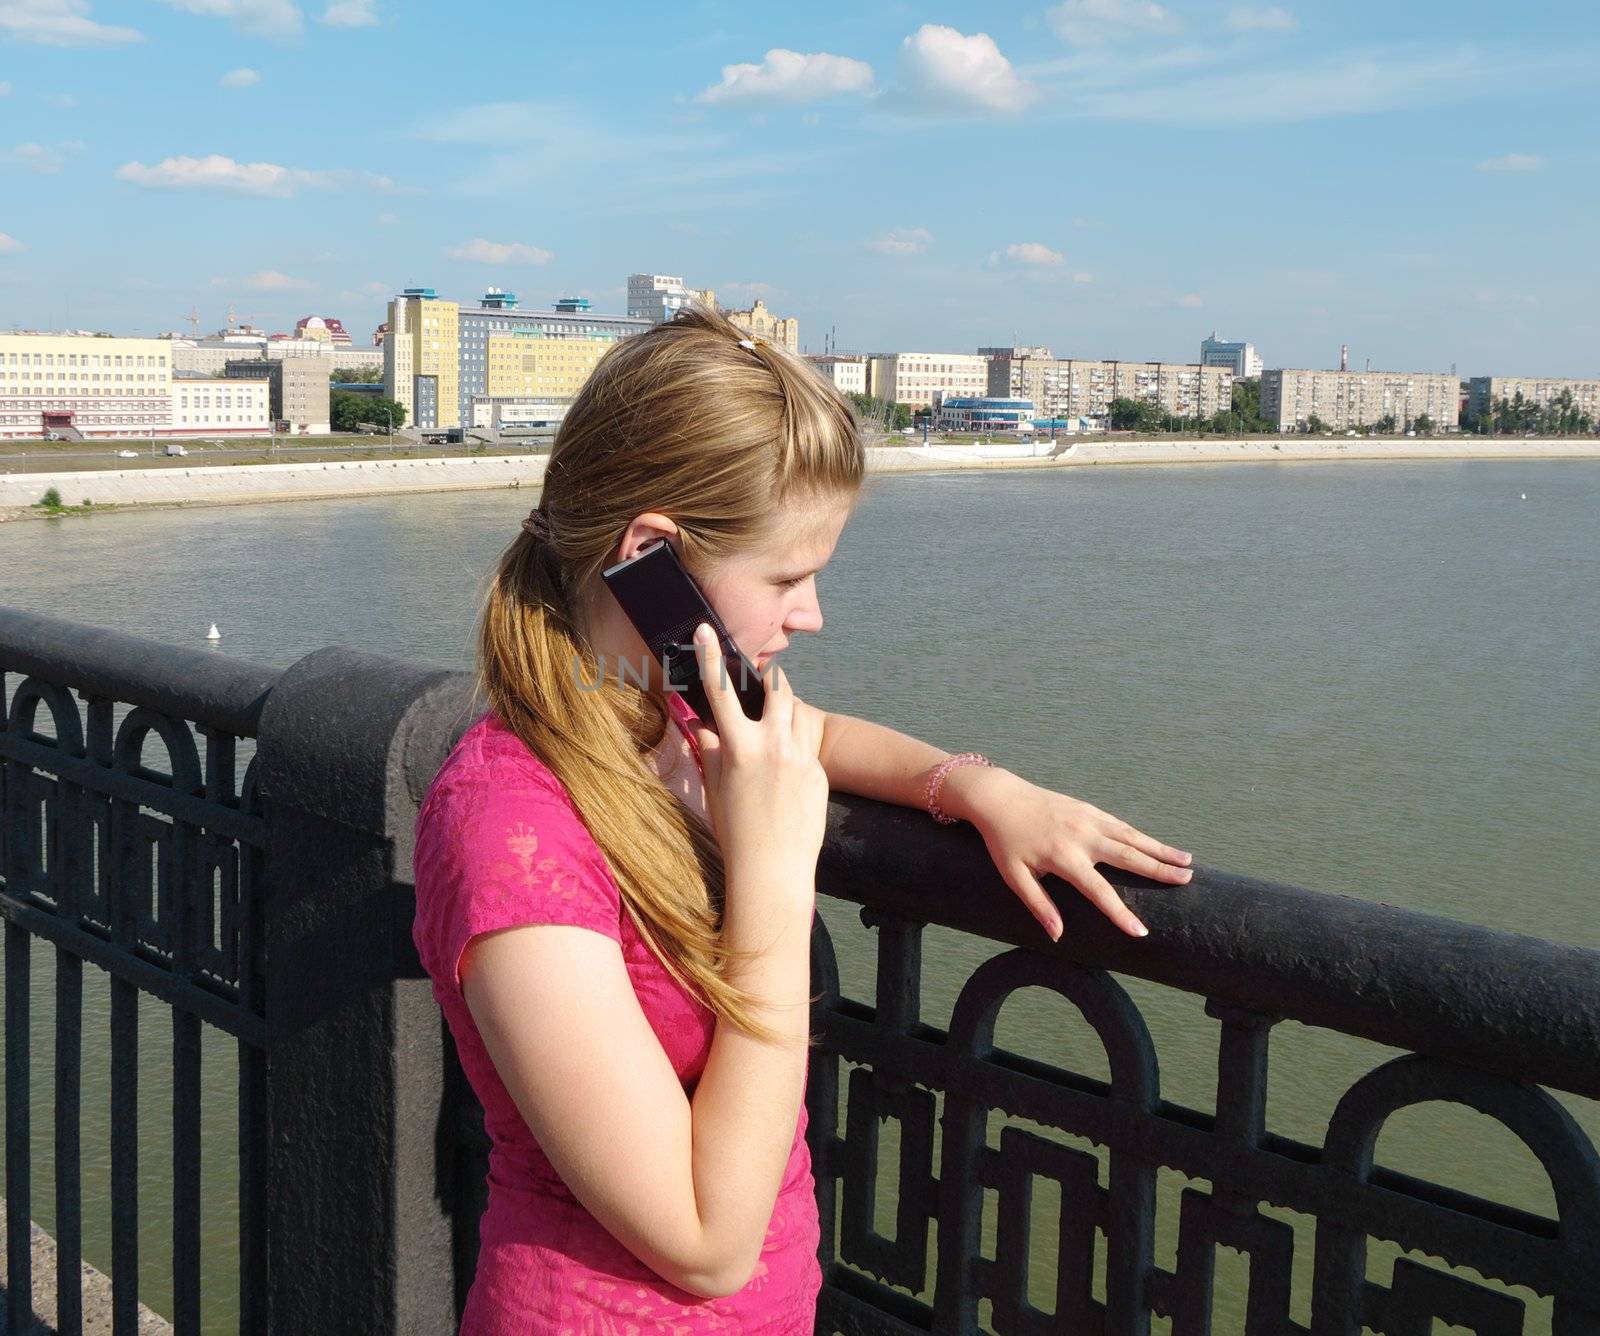  young girl speaks over phone  by HGalina